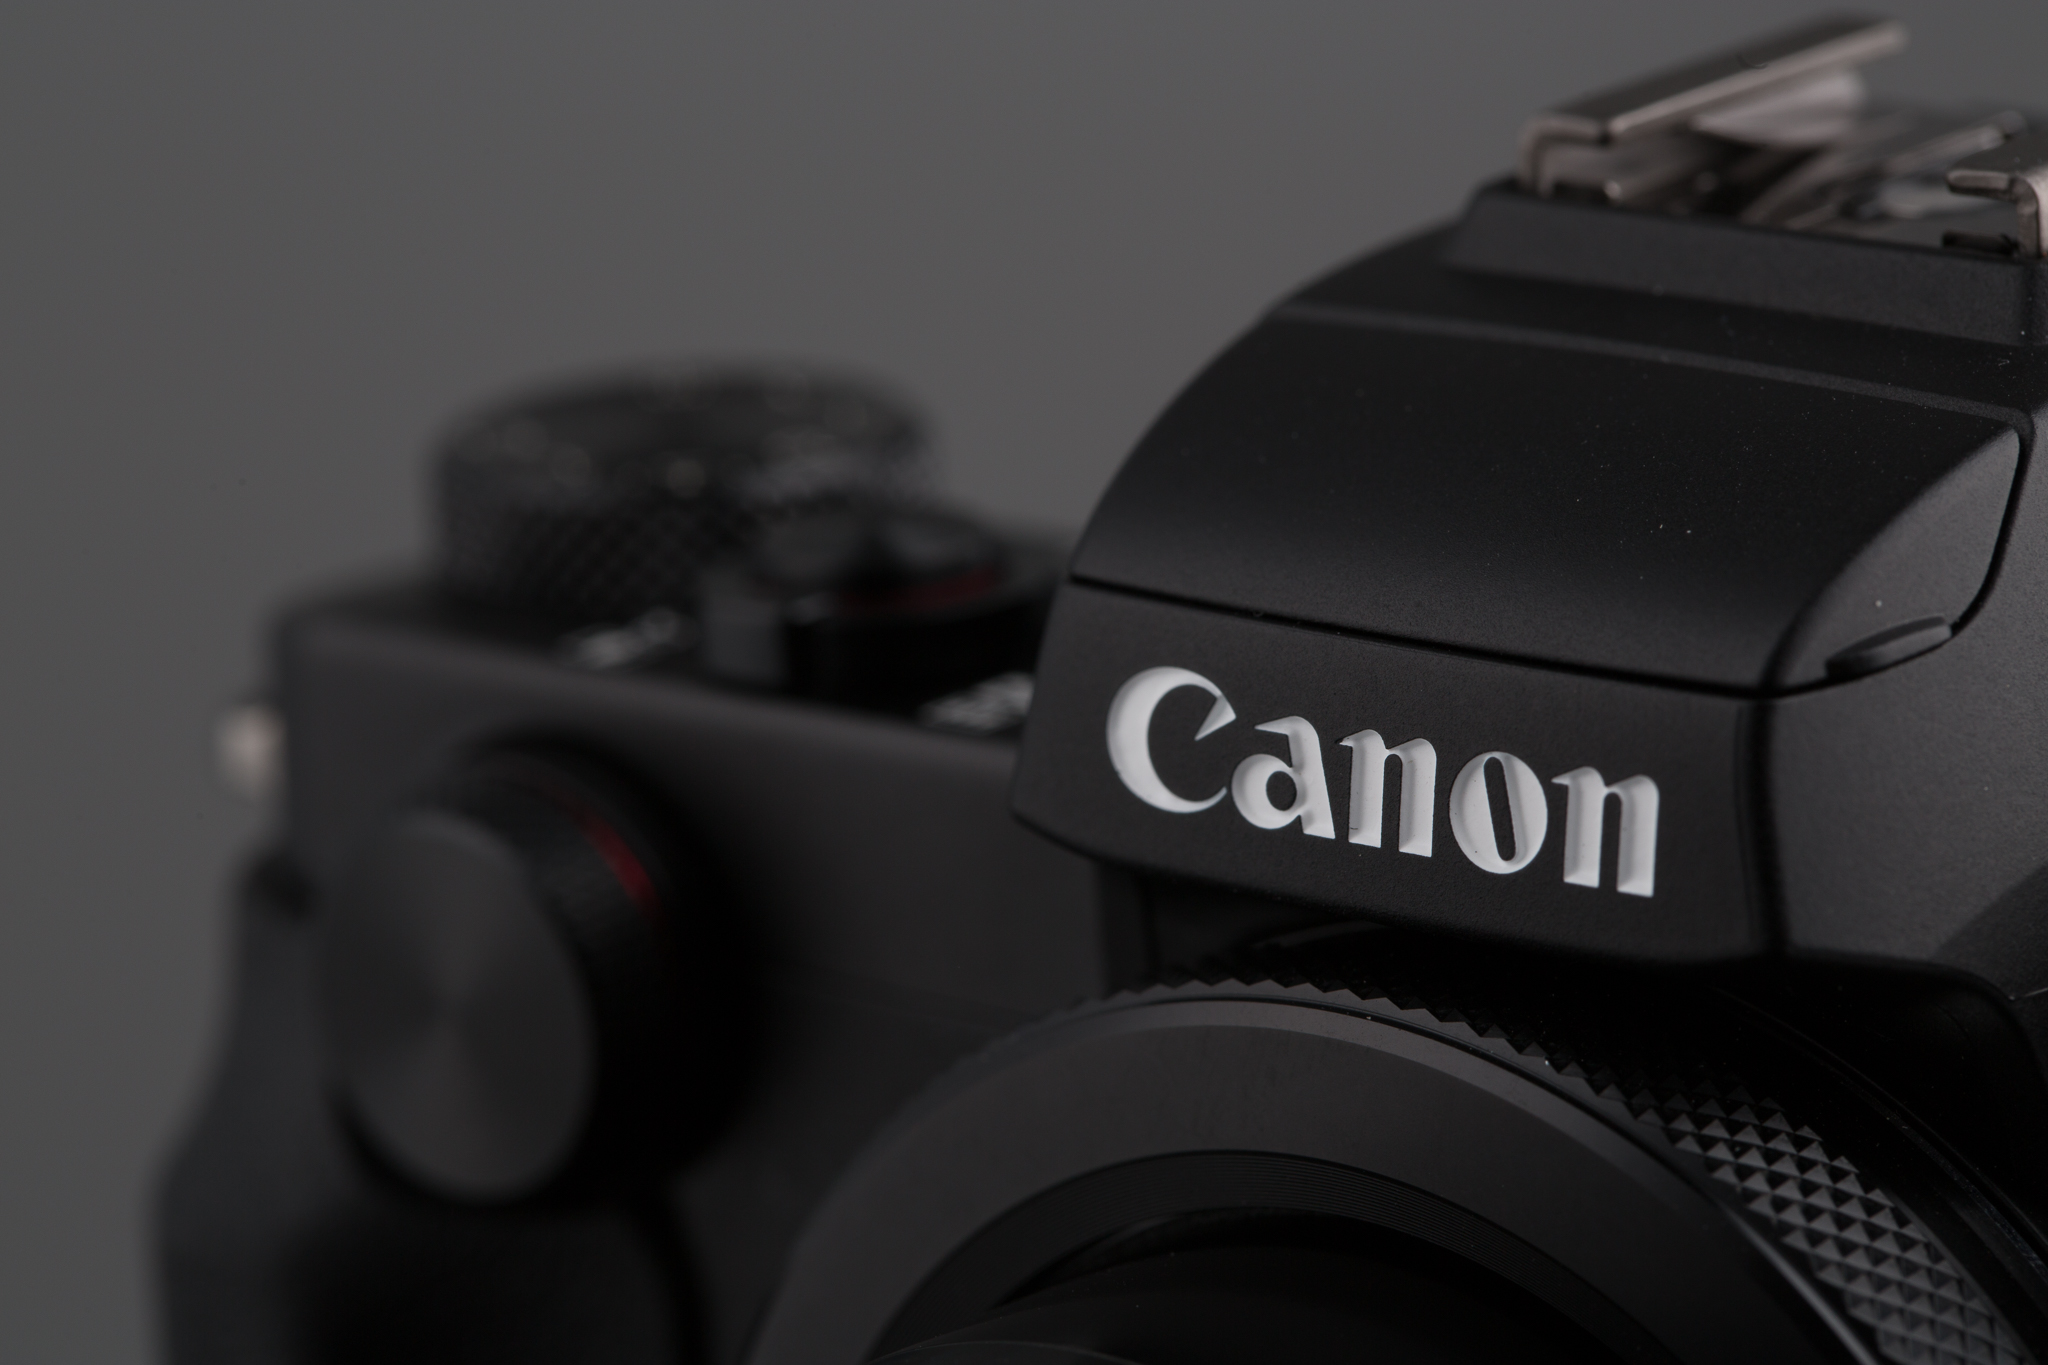 Canon G5X Review